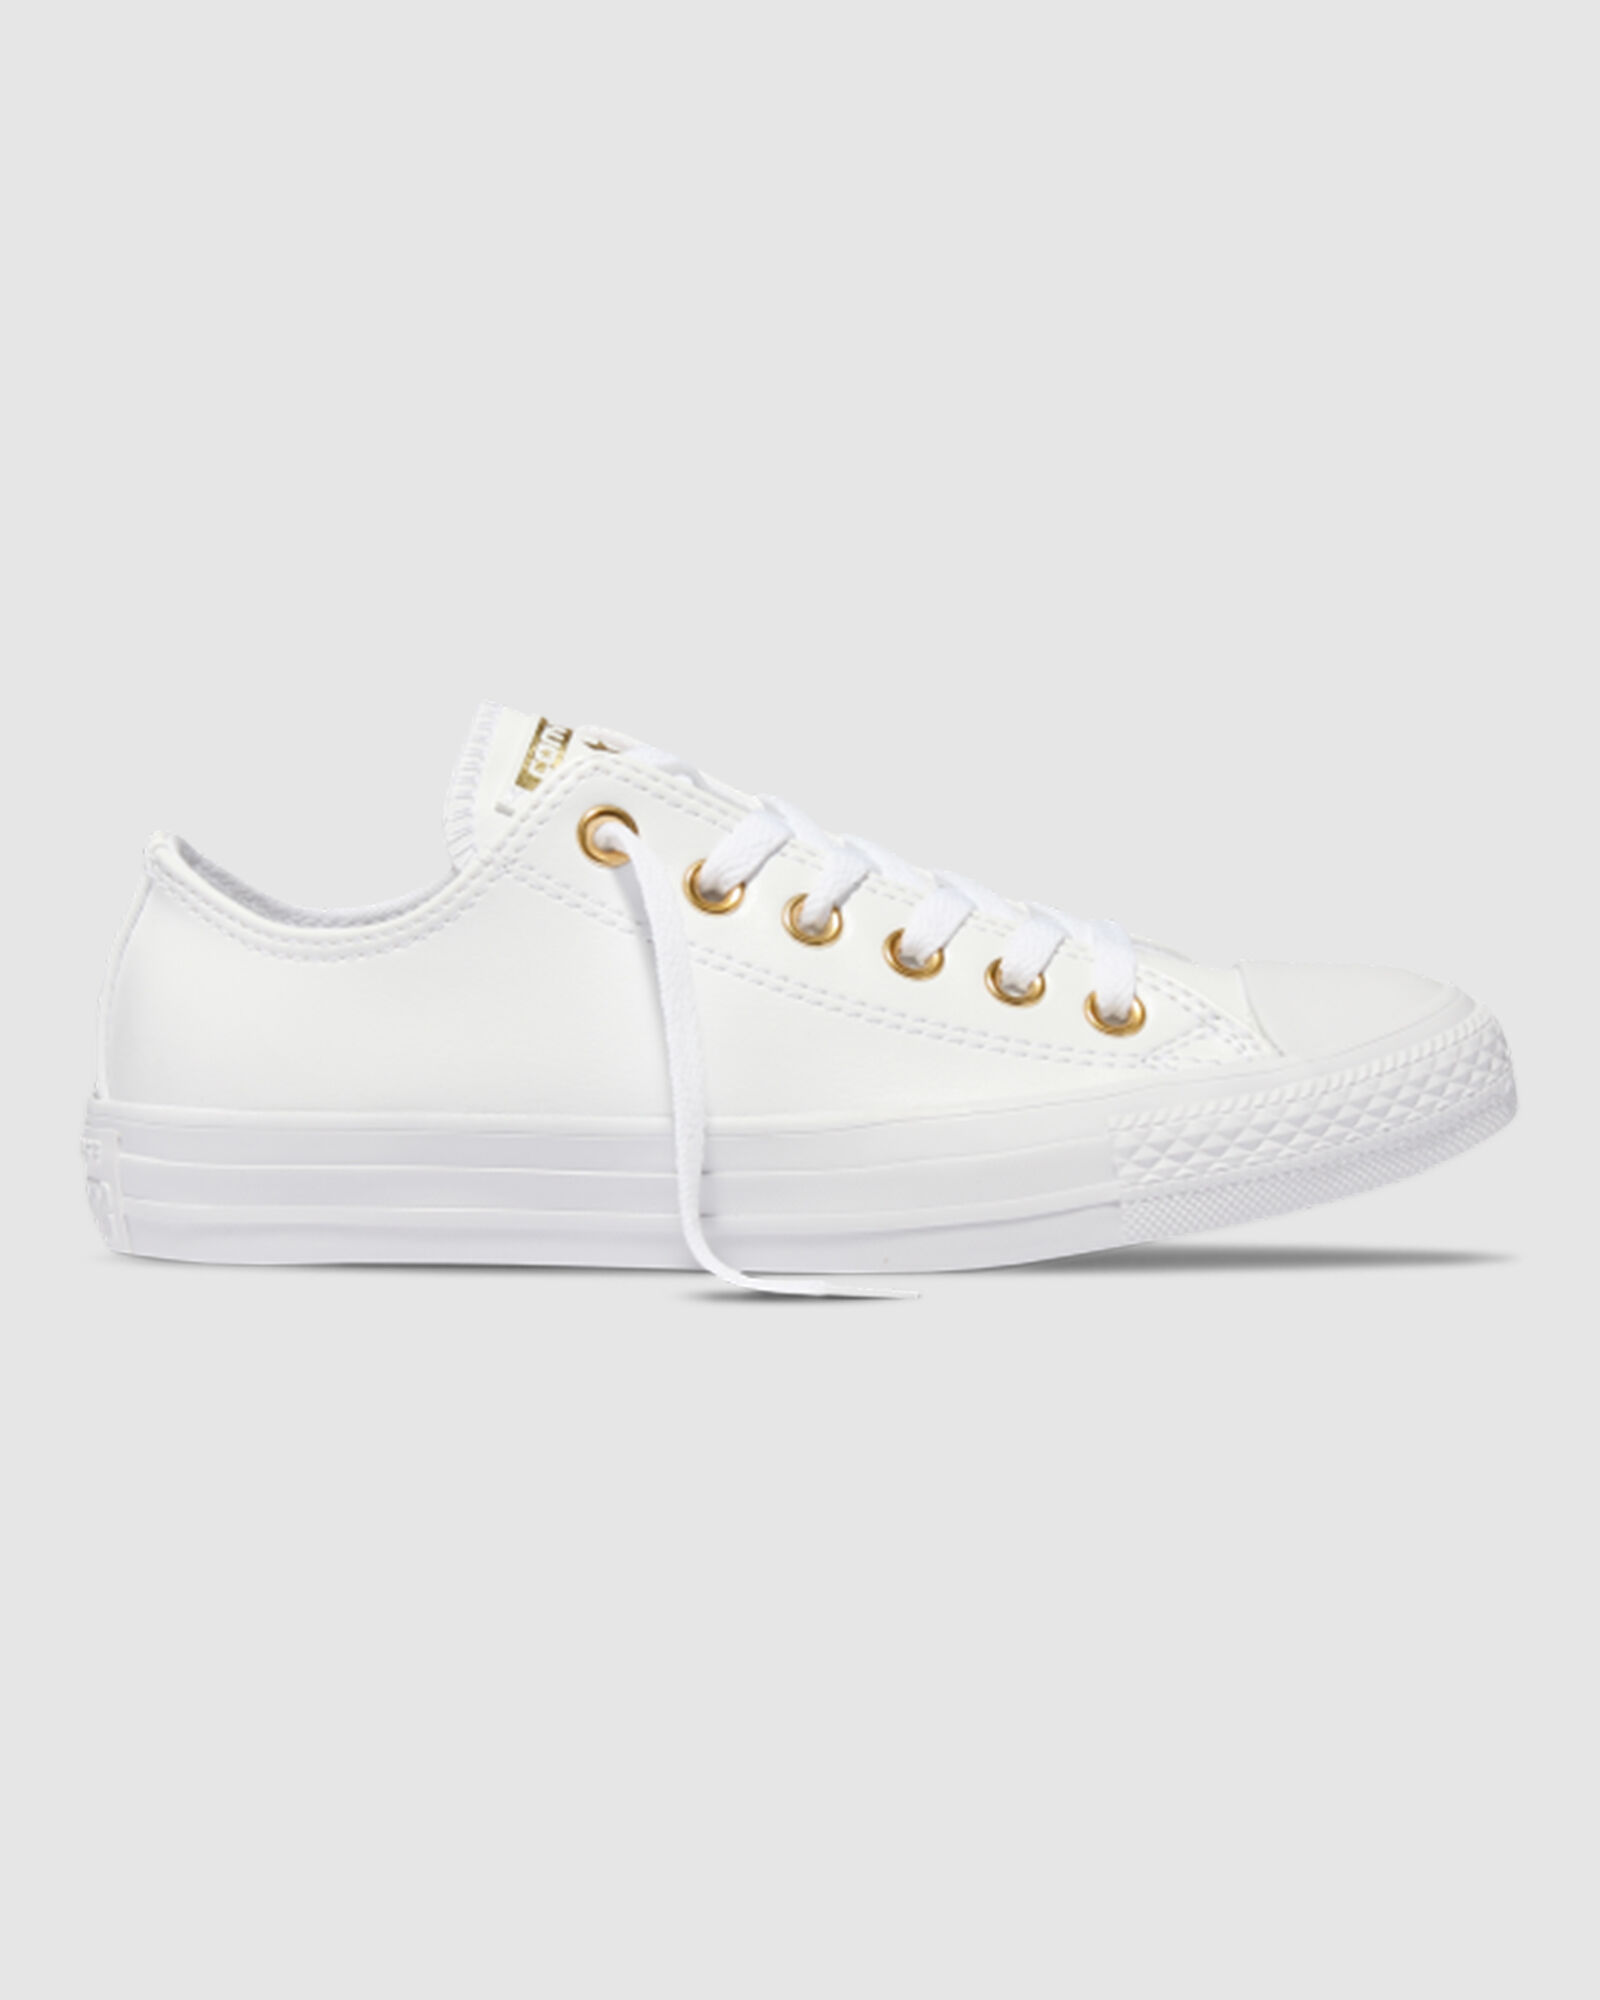 white and gold high top converse